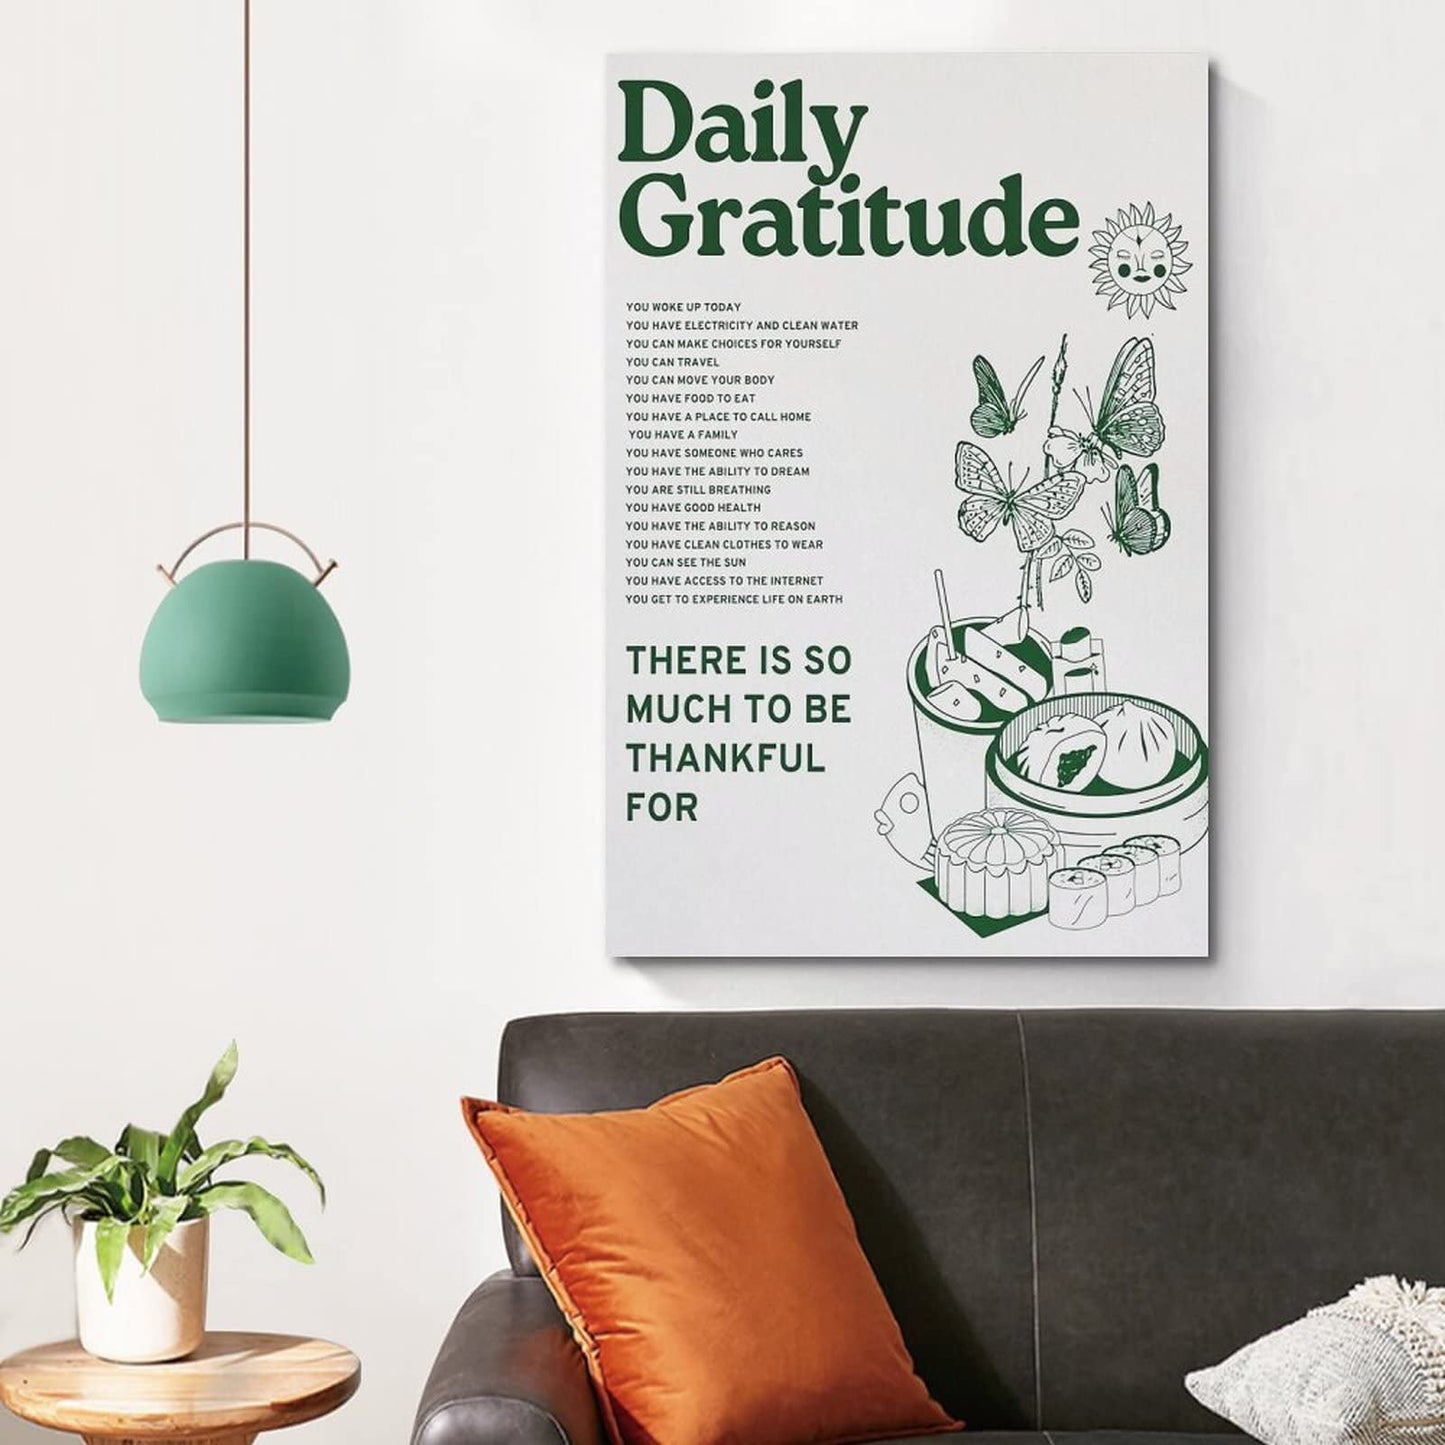 SUANA Vintage Poster Green Inspirational Quotes Daily Gratitude Posters for Room Aesthetic Poster Decorative Painting Canvas Wall Art Living Room Posters Bedroom Painting 12x18inch(30x45cm)